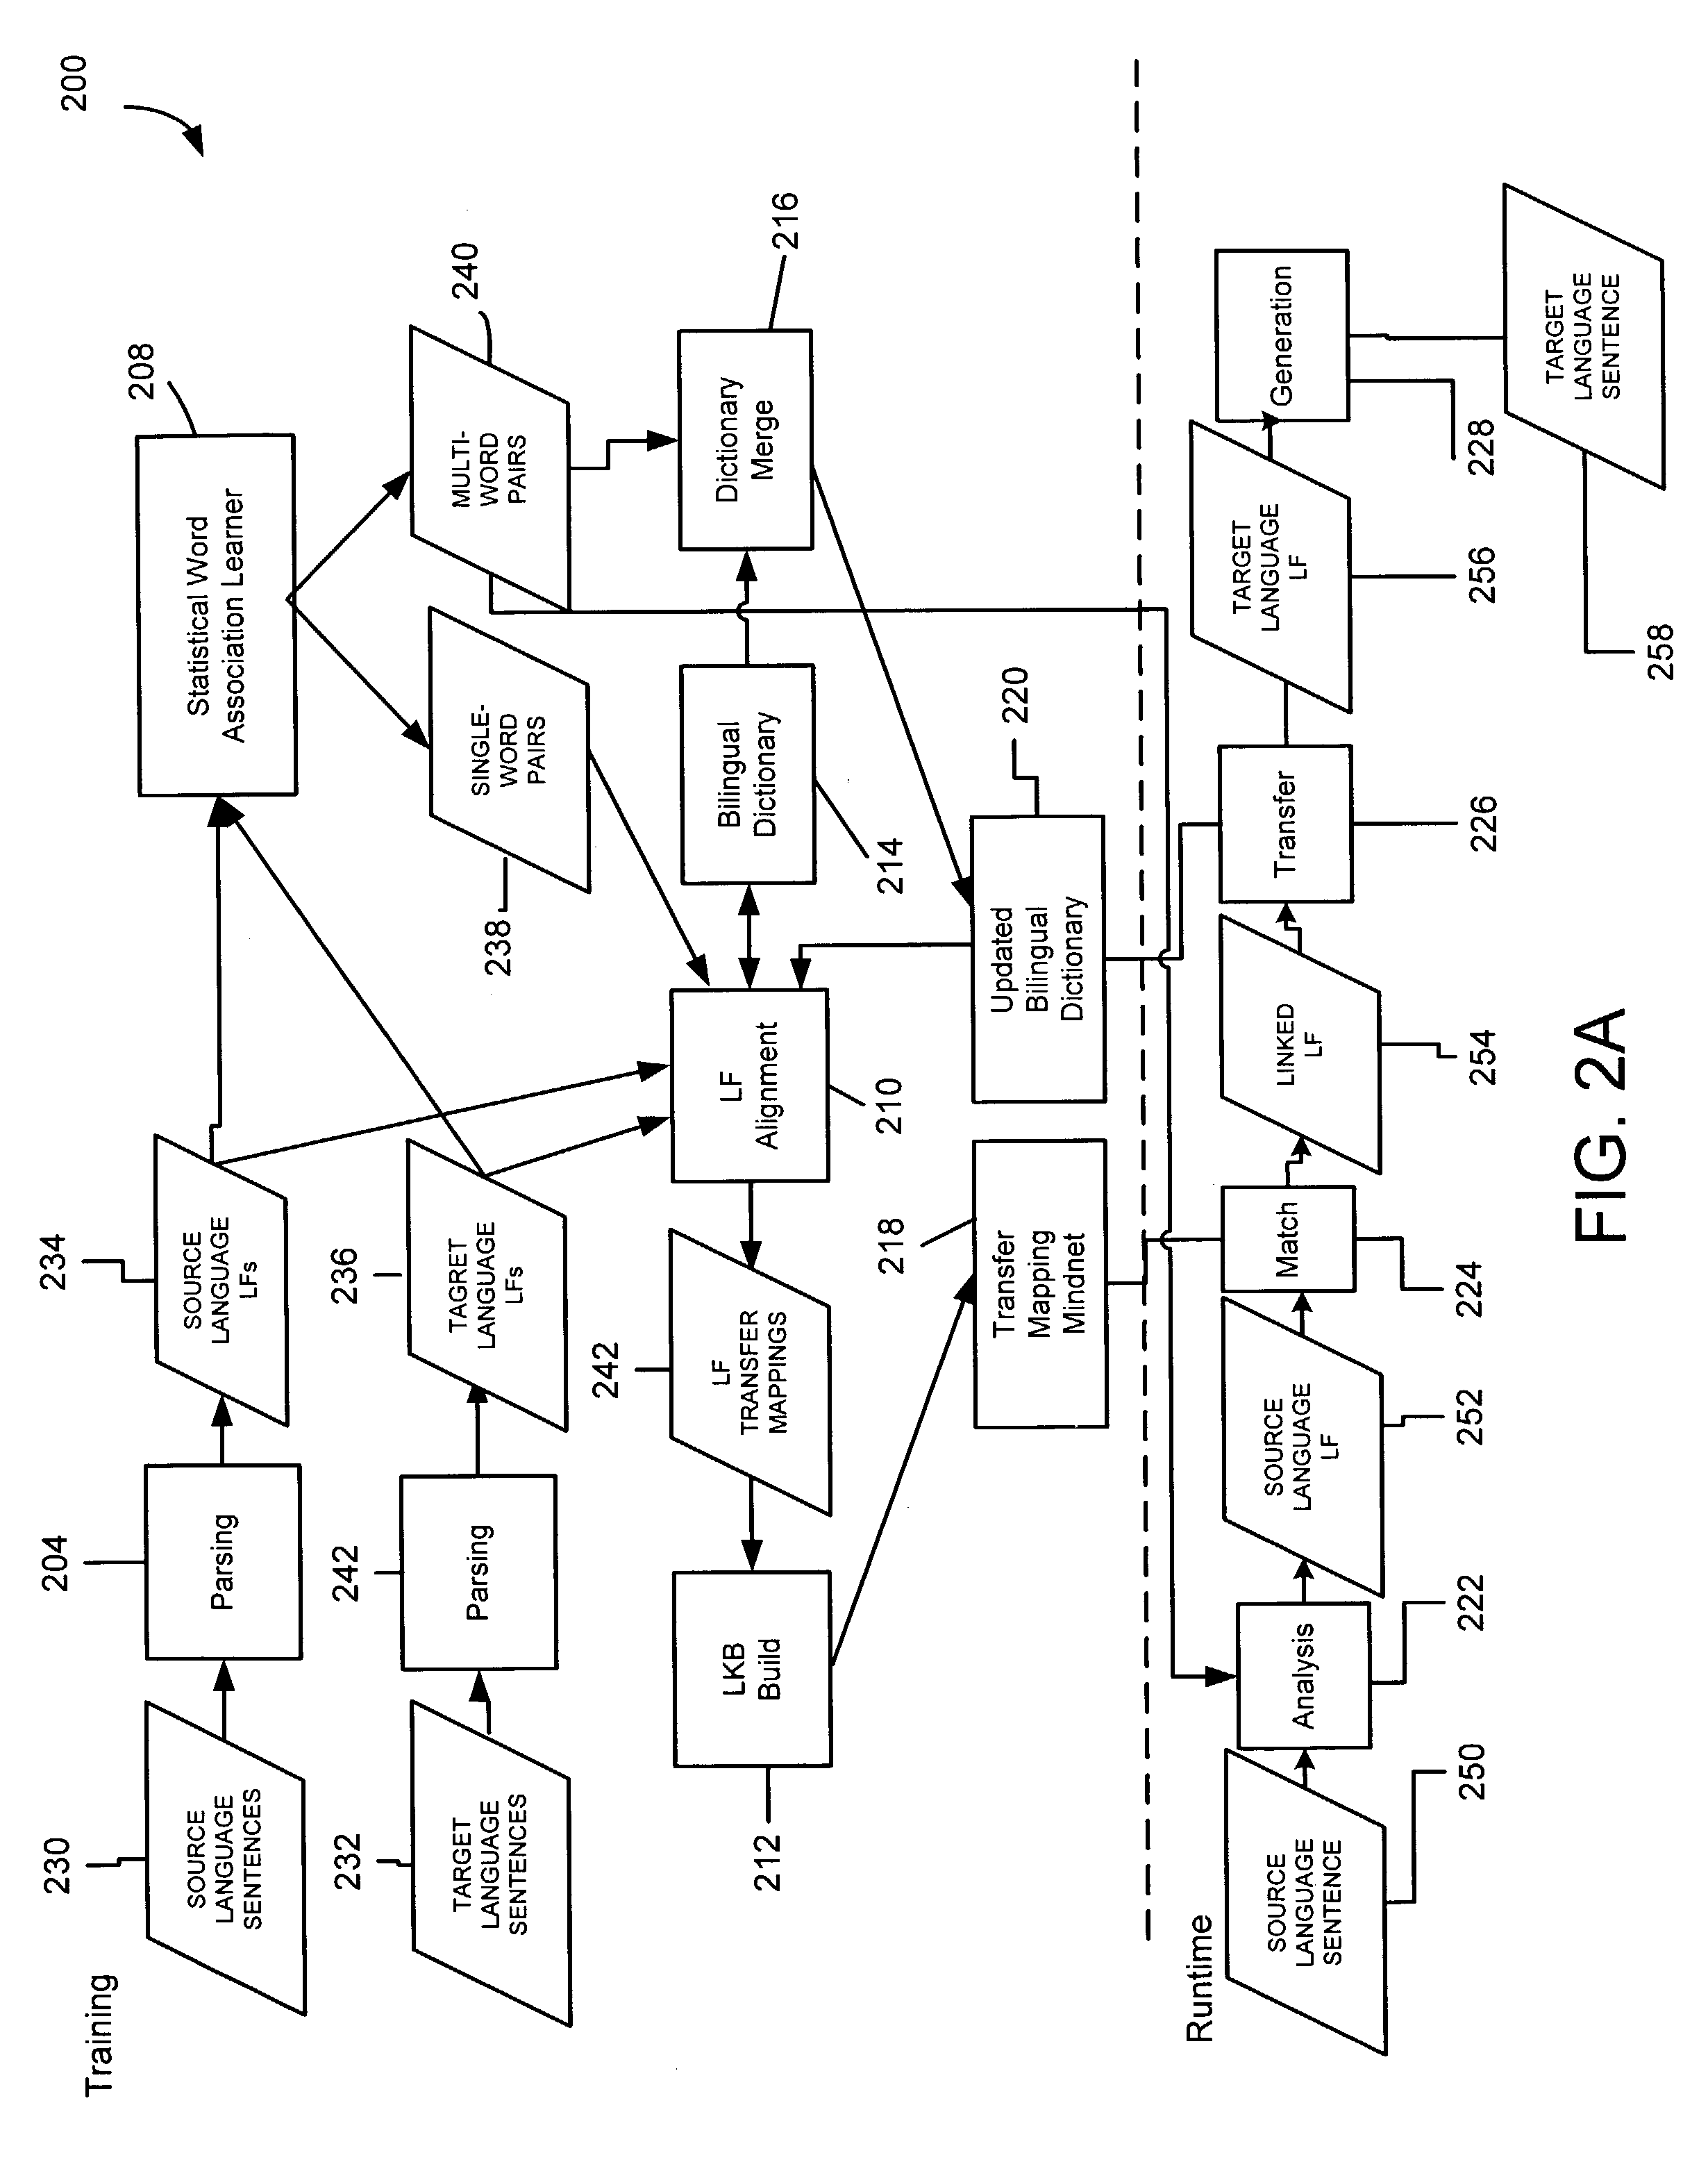 Statistical method and apparatus for learning translation relationships among phrases